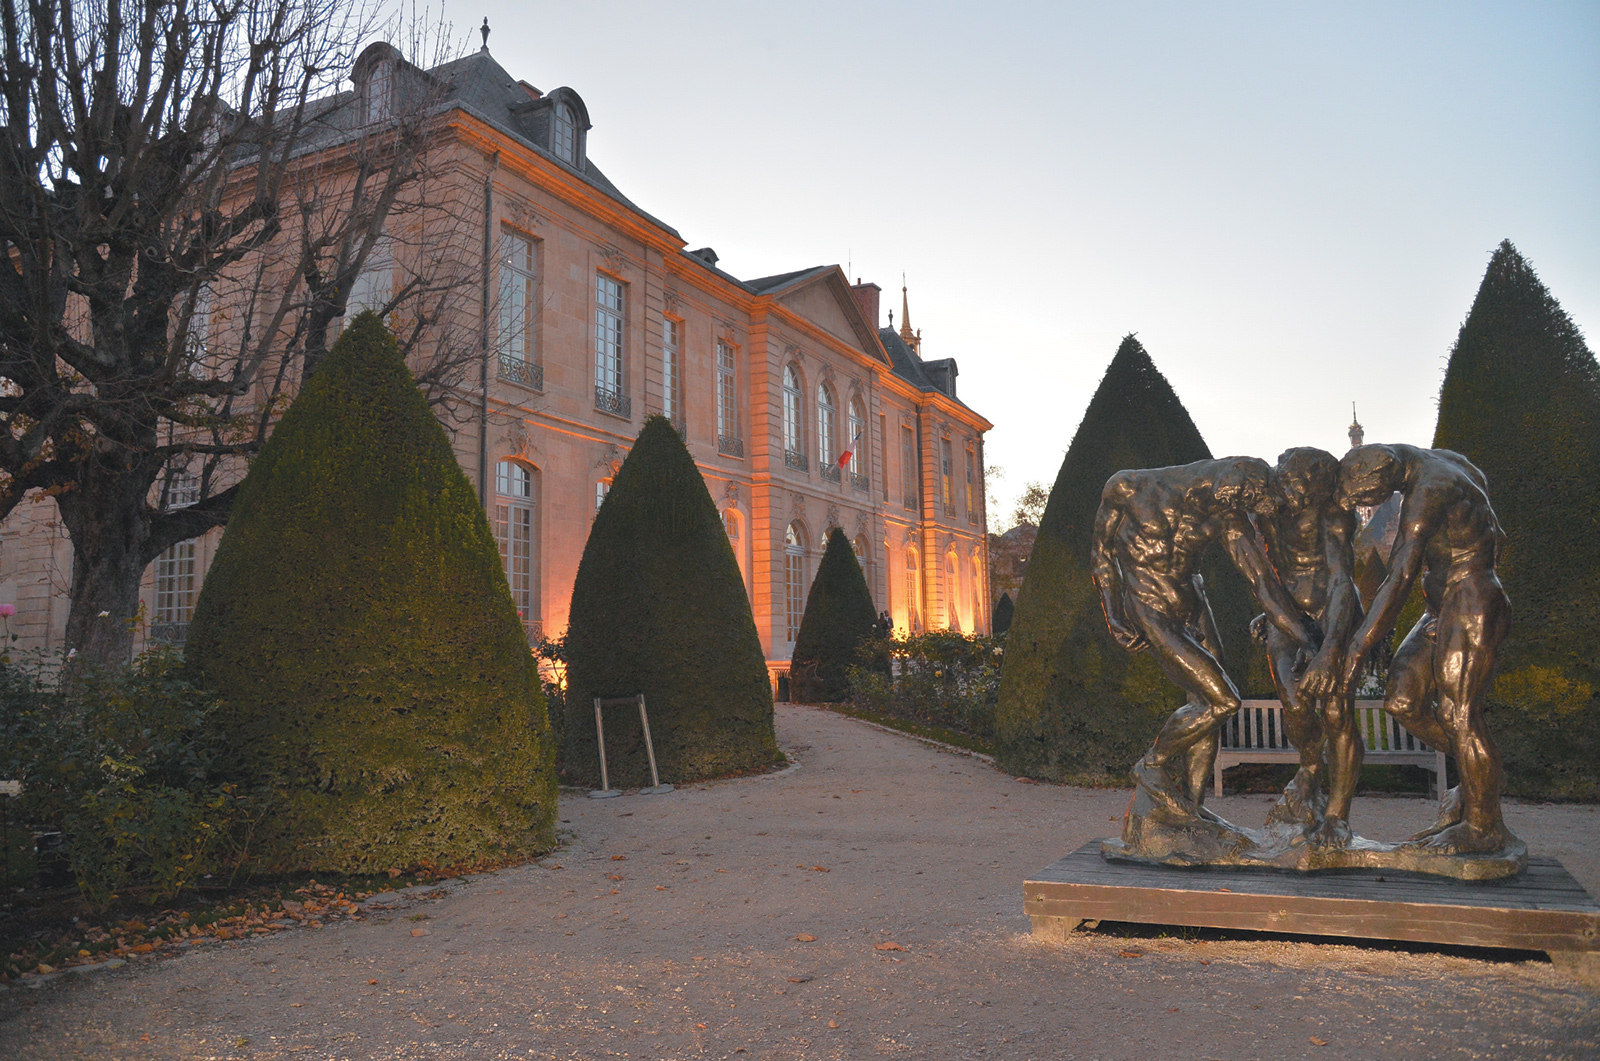 The renovated Rodin Museum in Paris, which reopened to the public on November 12, 2015, on the 175th anniversary of Rodin’s birth. At right is Rodin’s sculpture The Three Shades (before 1886).